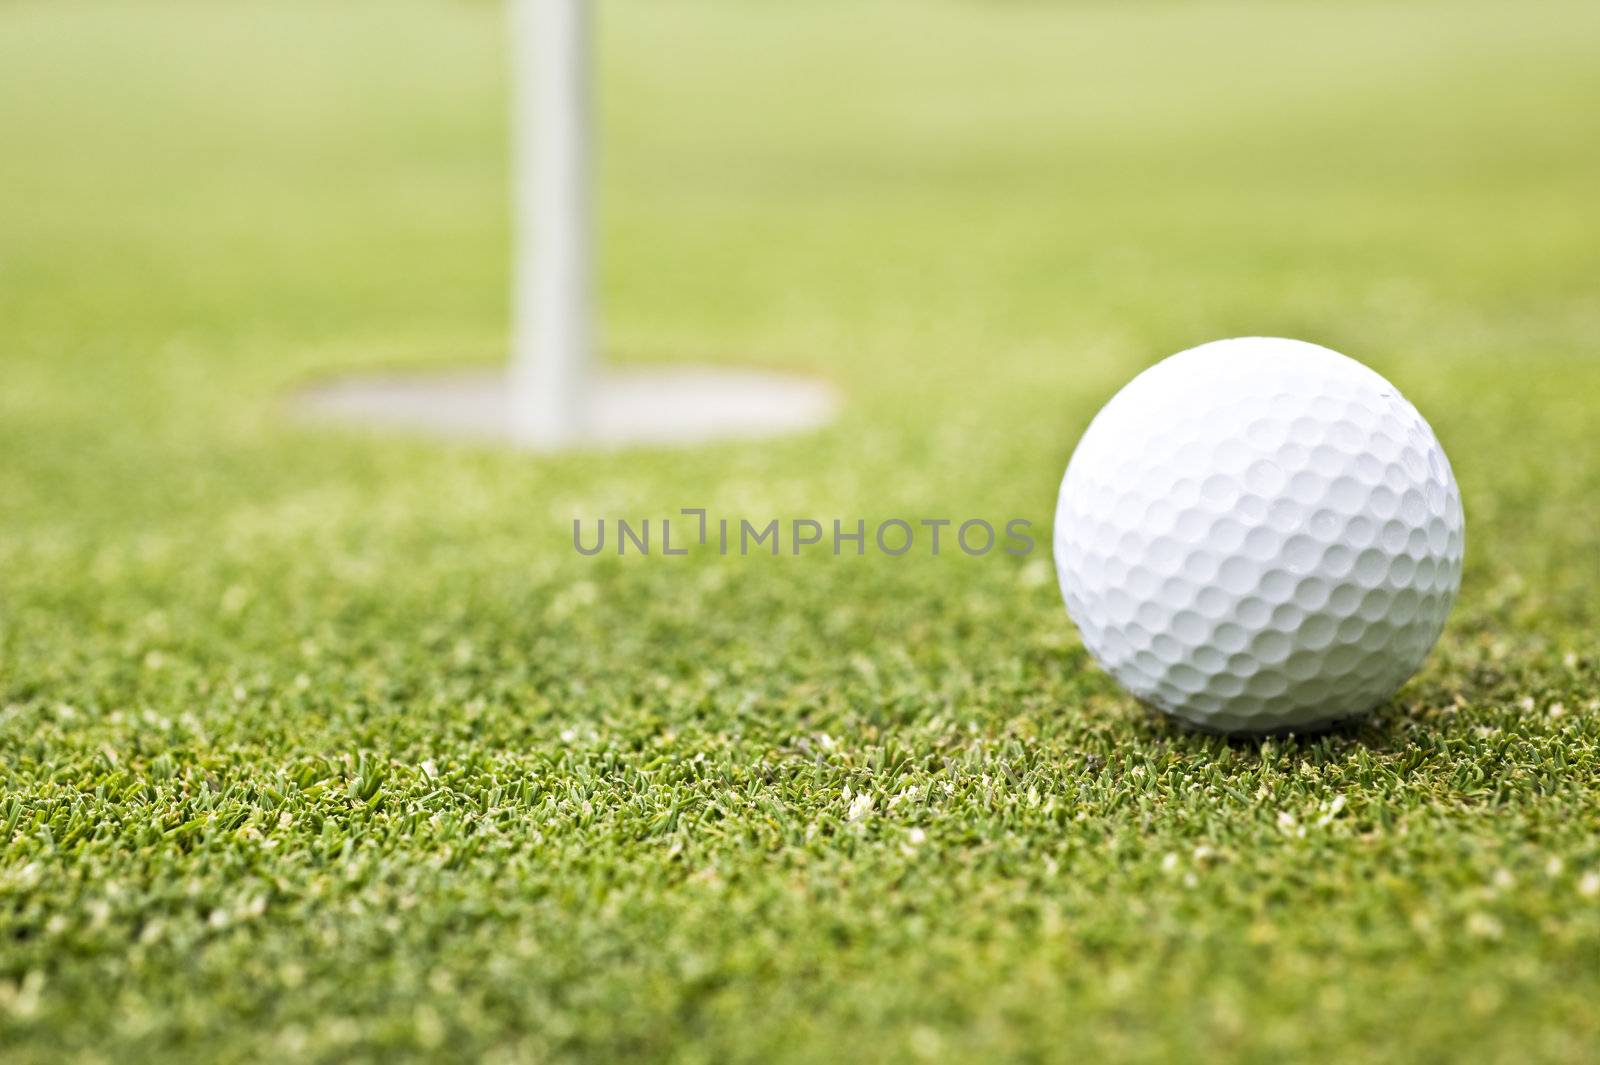 Golf ball on a putting green with the flag in the background - very shallow depth of field